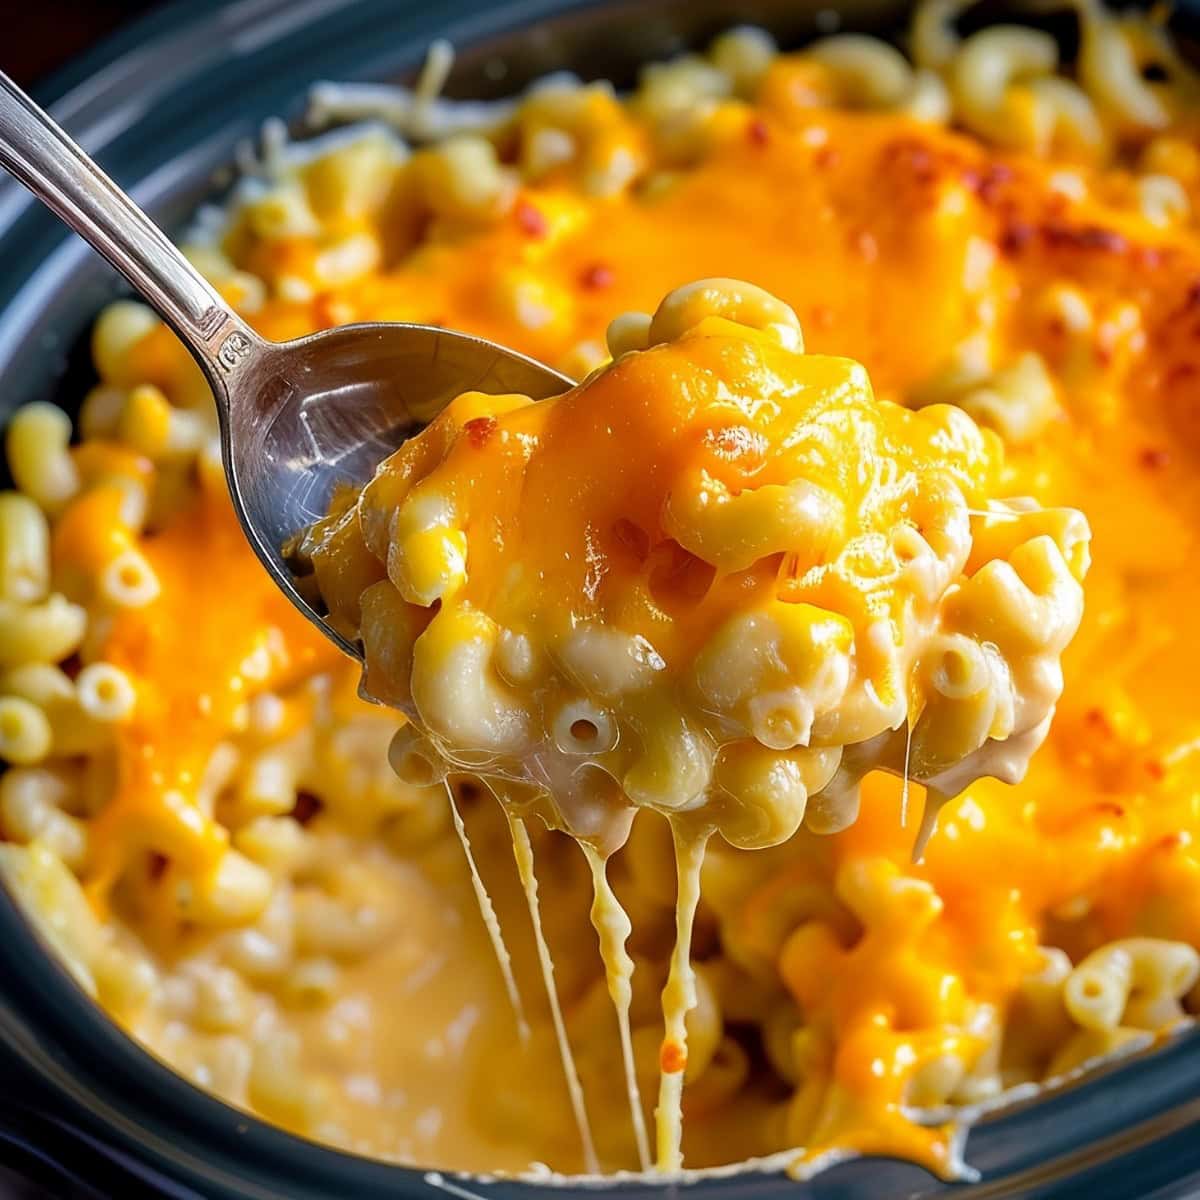 Trisha Yearwood's Crockpot Mac and Cheese in a Crockpot with a Serving Spoon Removing a Bite